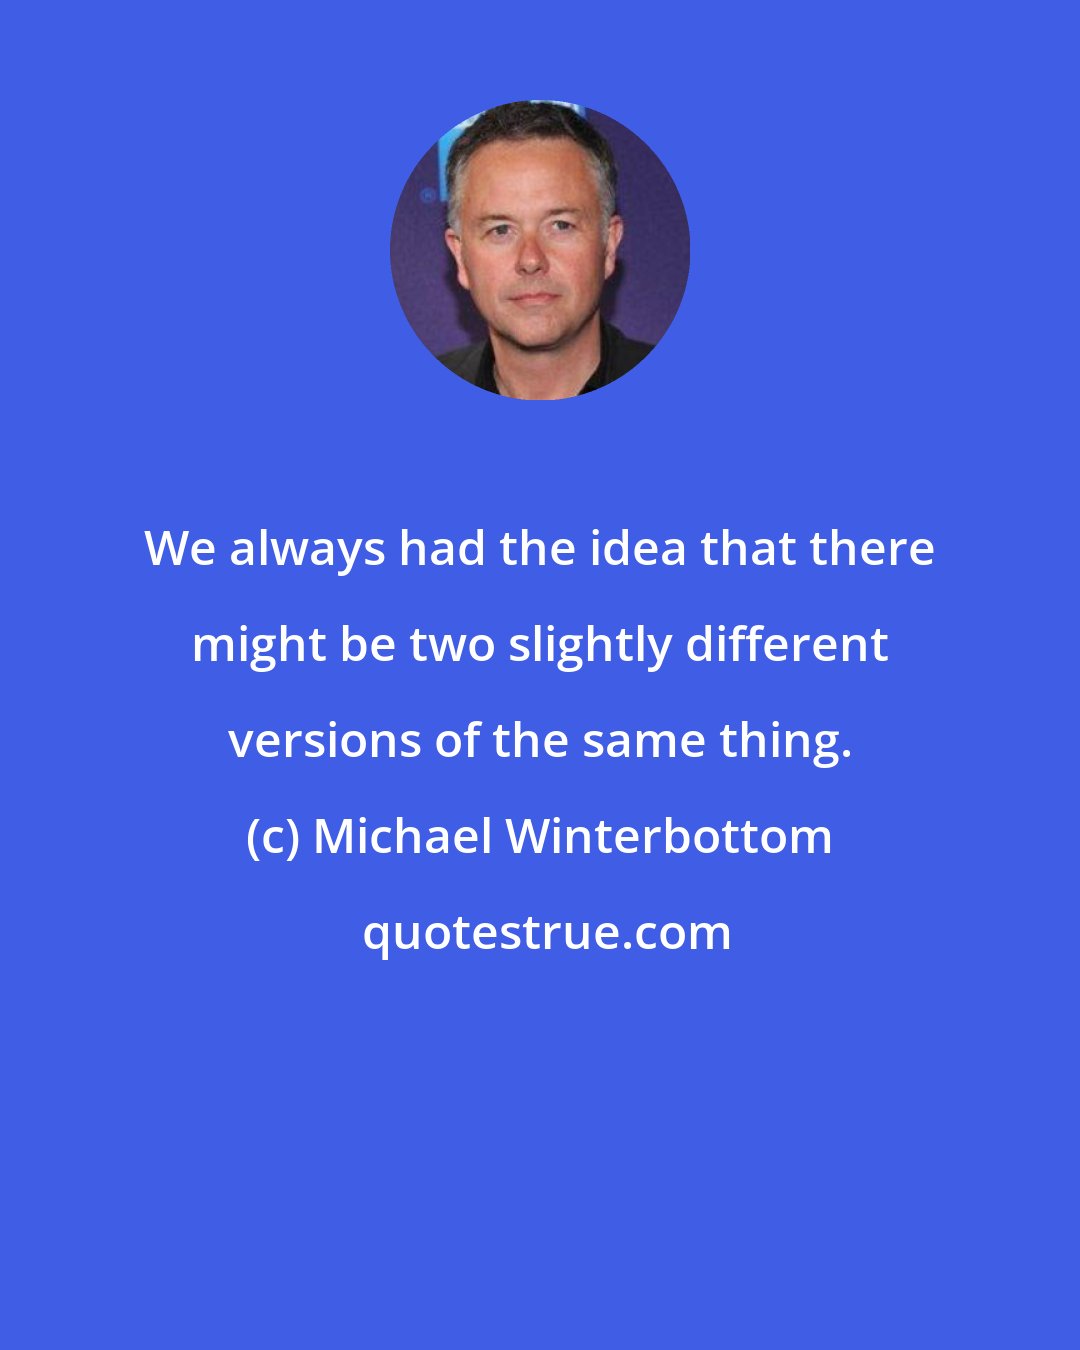 Michael Winterbottom: We always had the idea that there might be two slightly different versions of the same thing.